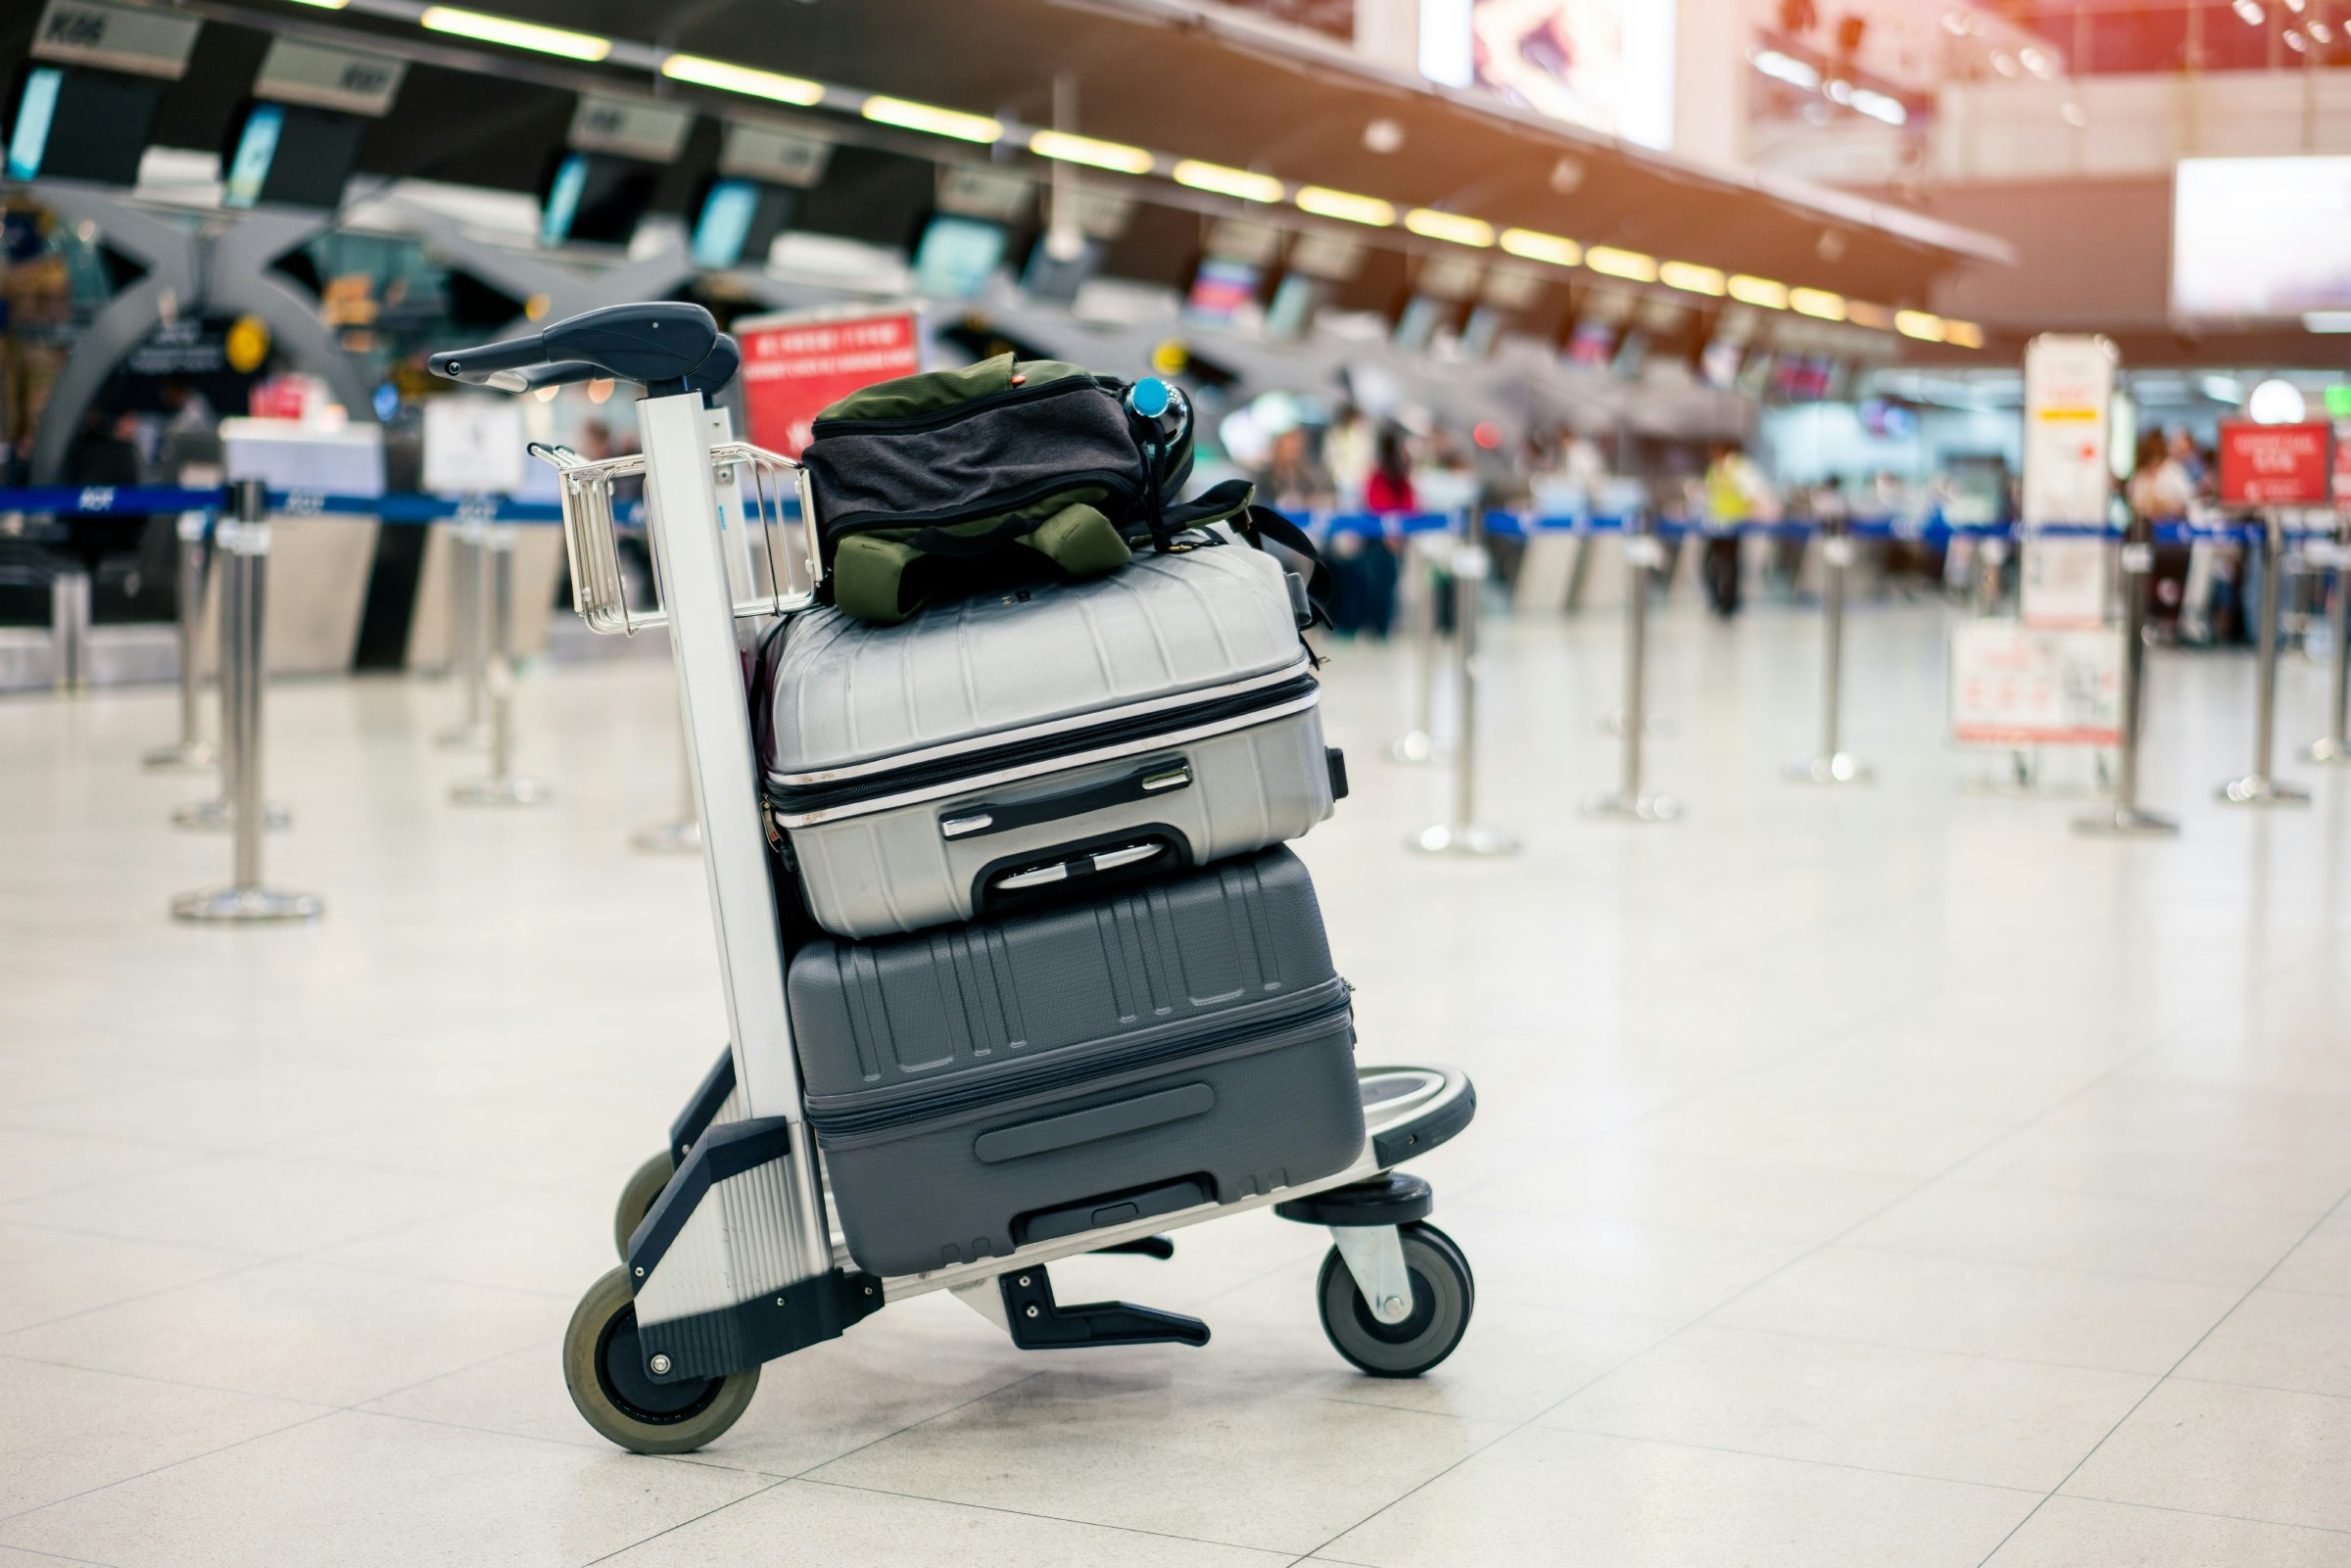 Suitcases stacked on a luggage trolley in an international airport